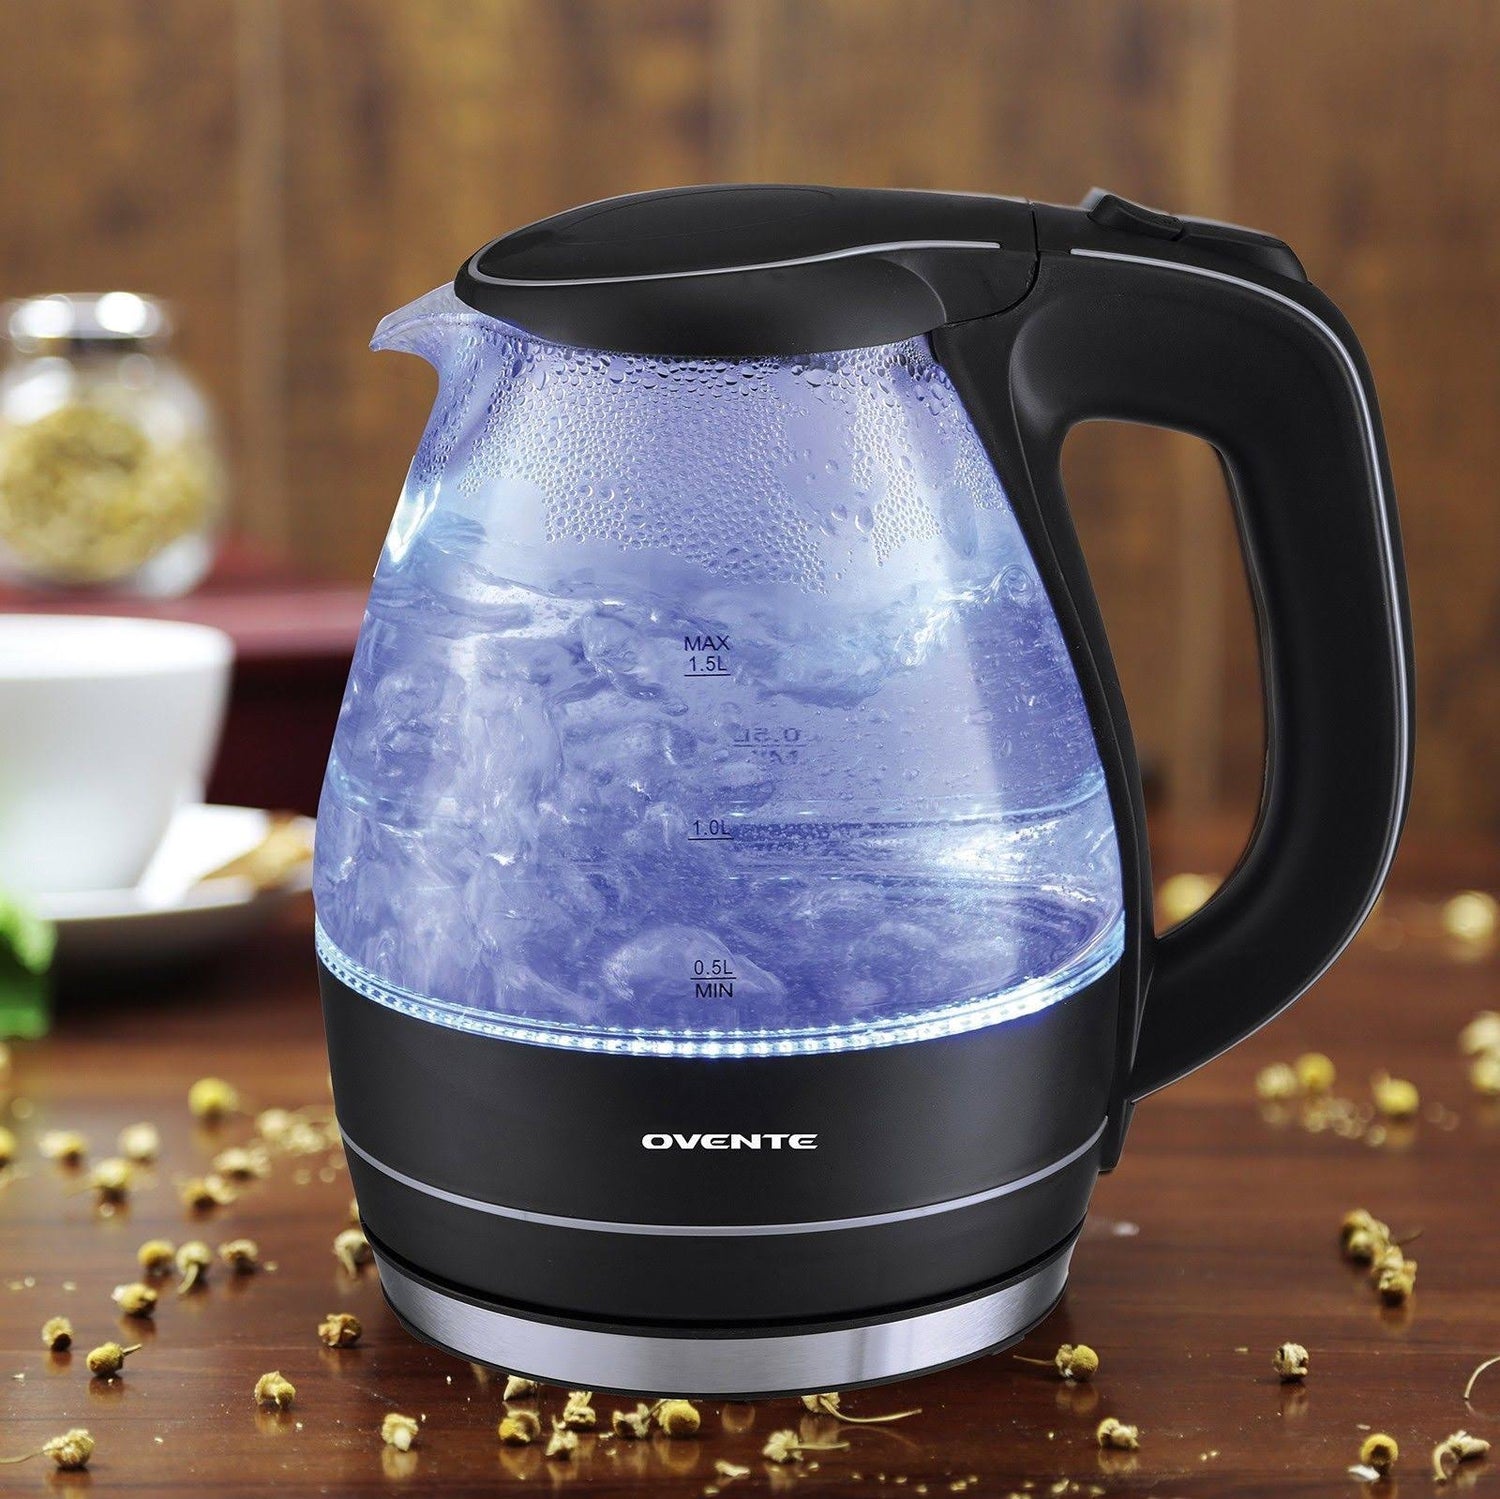 Ovente Lighted Electric Glass Kettle 1.5 L with Blue LED Lights, White Kg845w